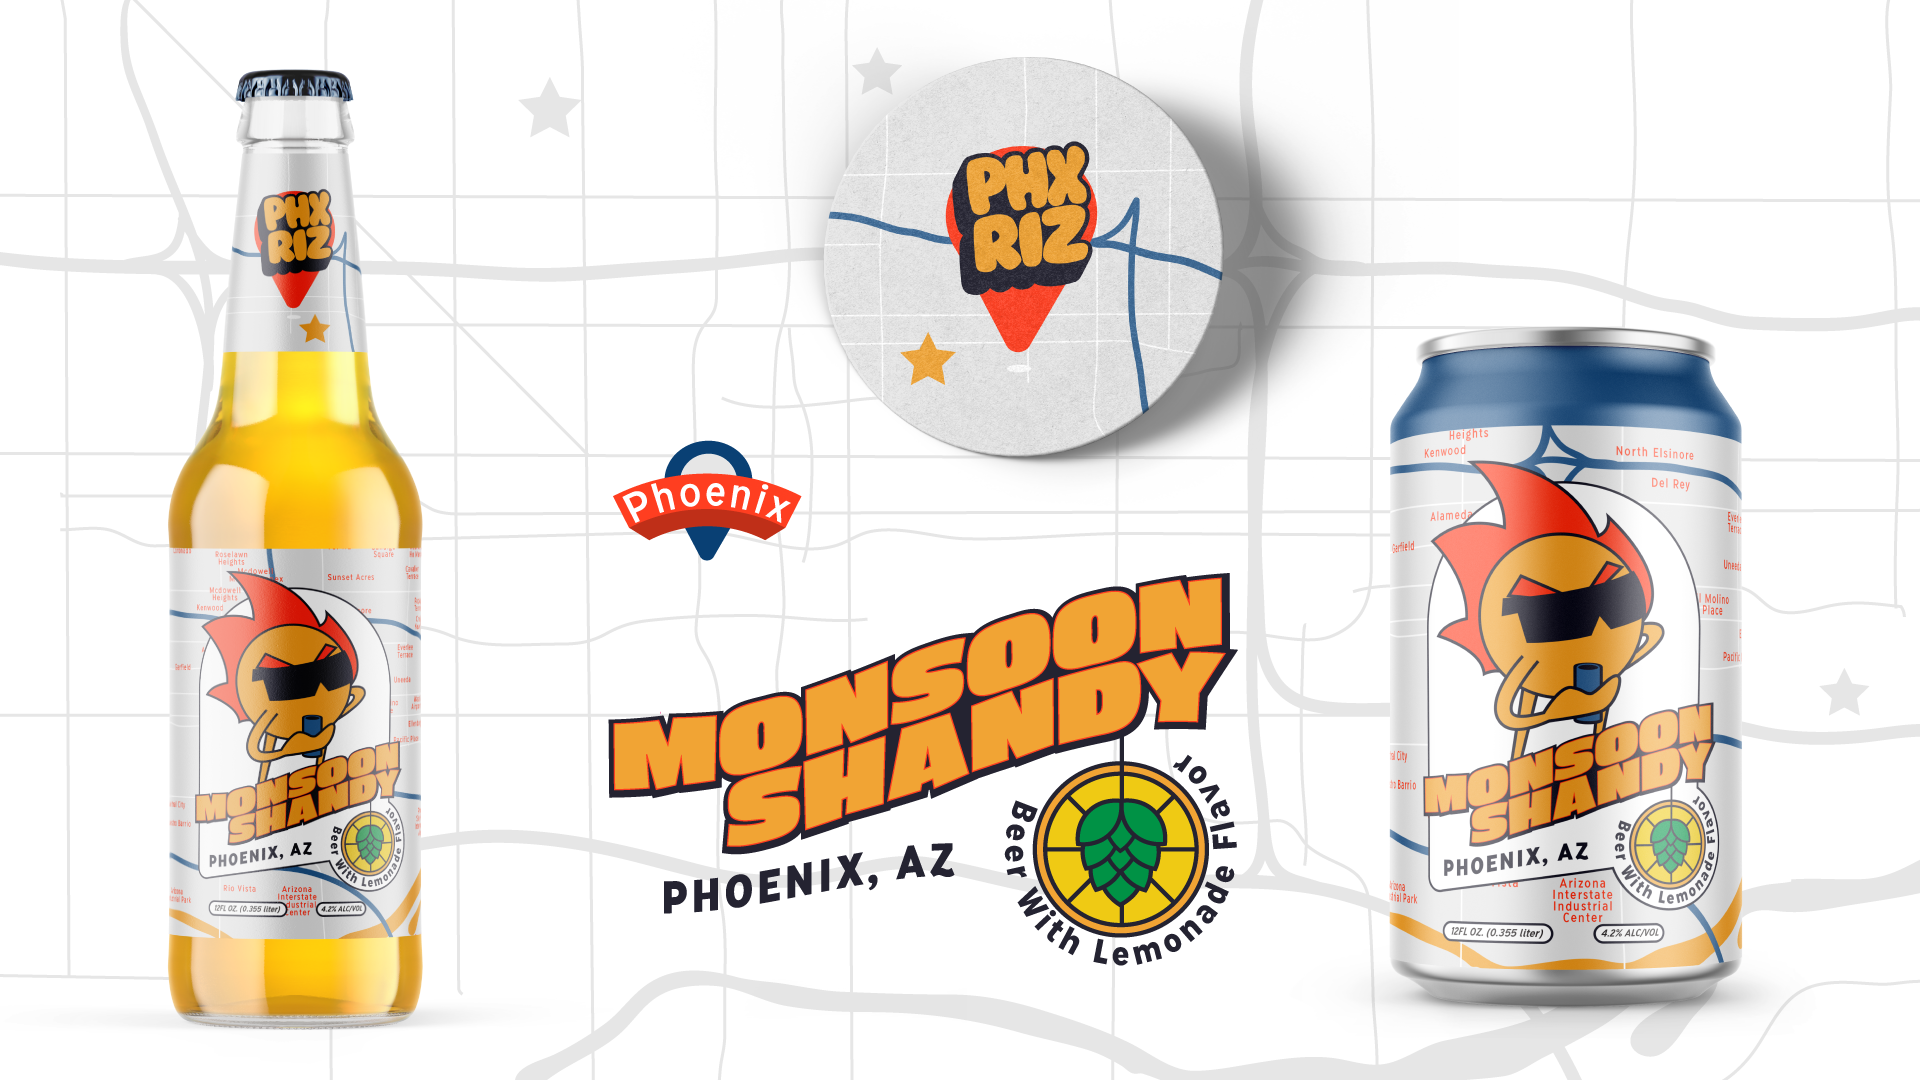 featured image four:PHX RIZ Brewery Branding